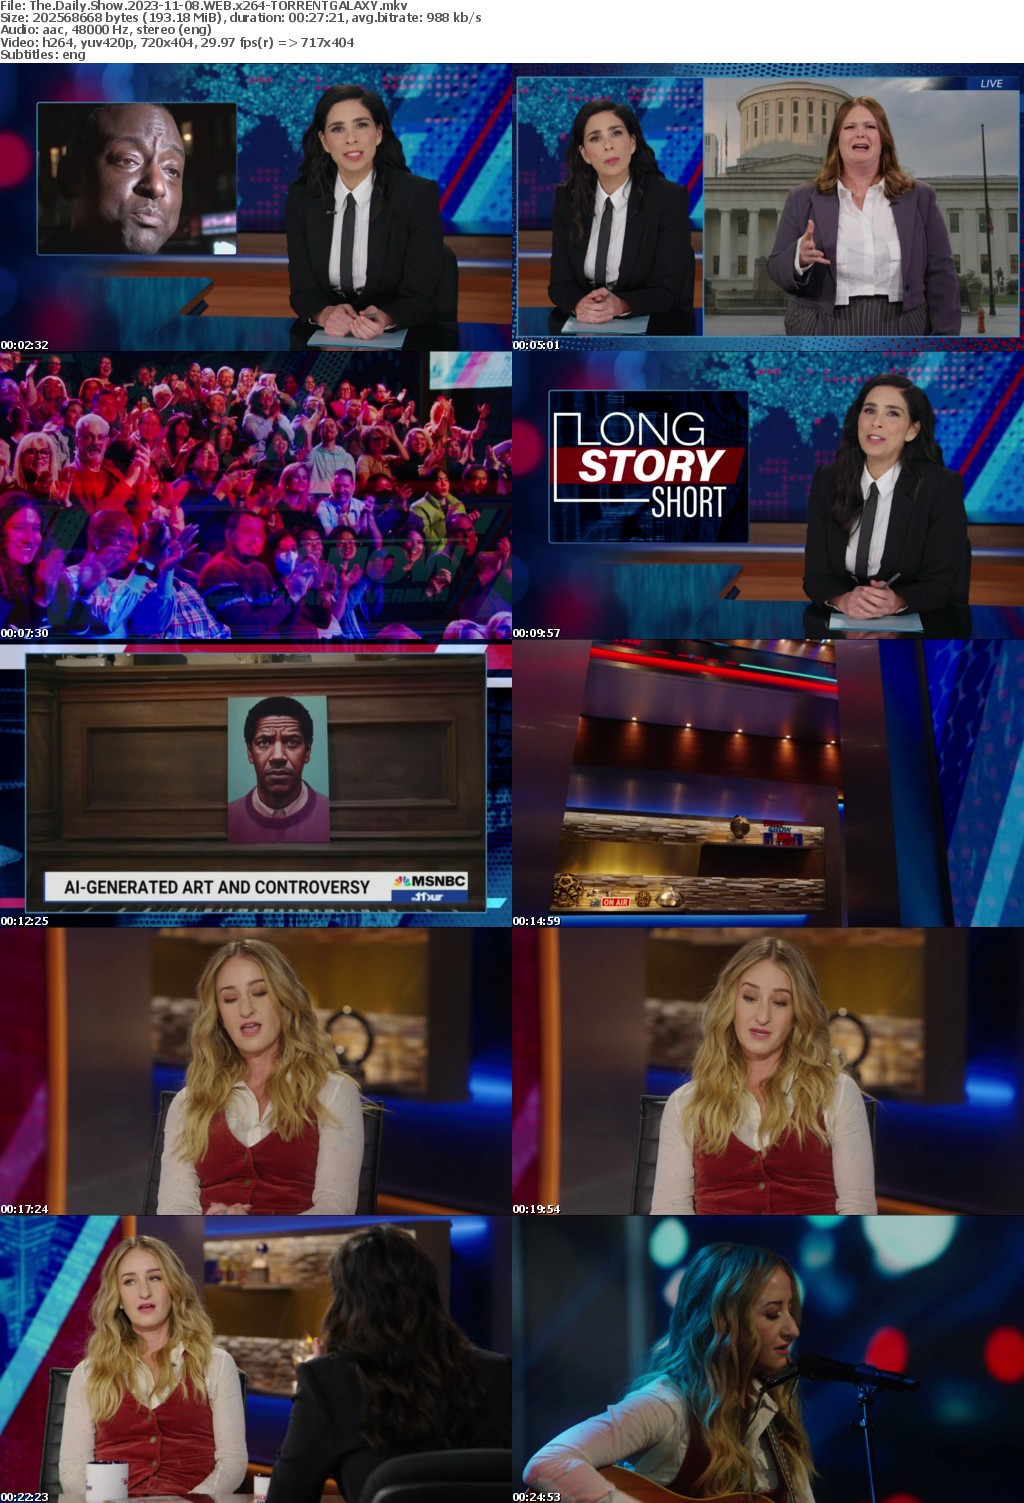 The Daily Show 2023-11-08 WEB x264-GALAXY